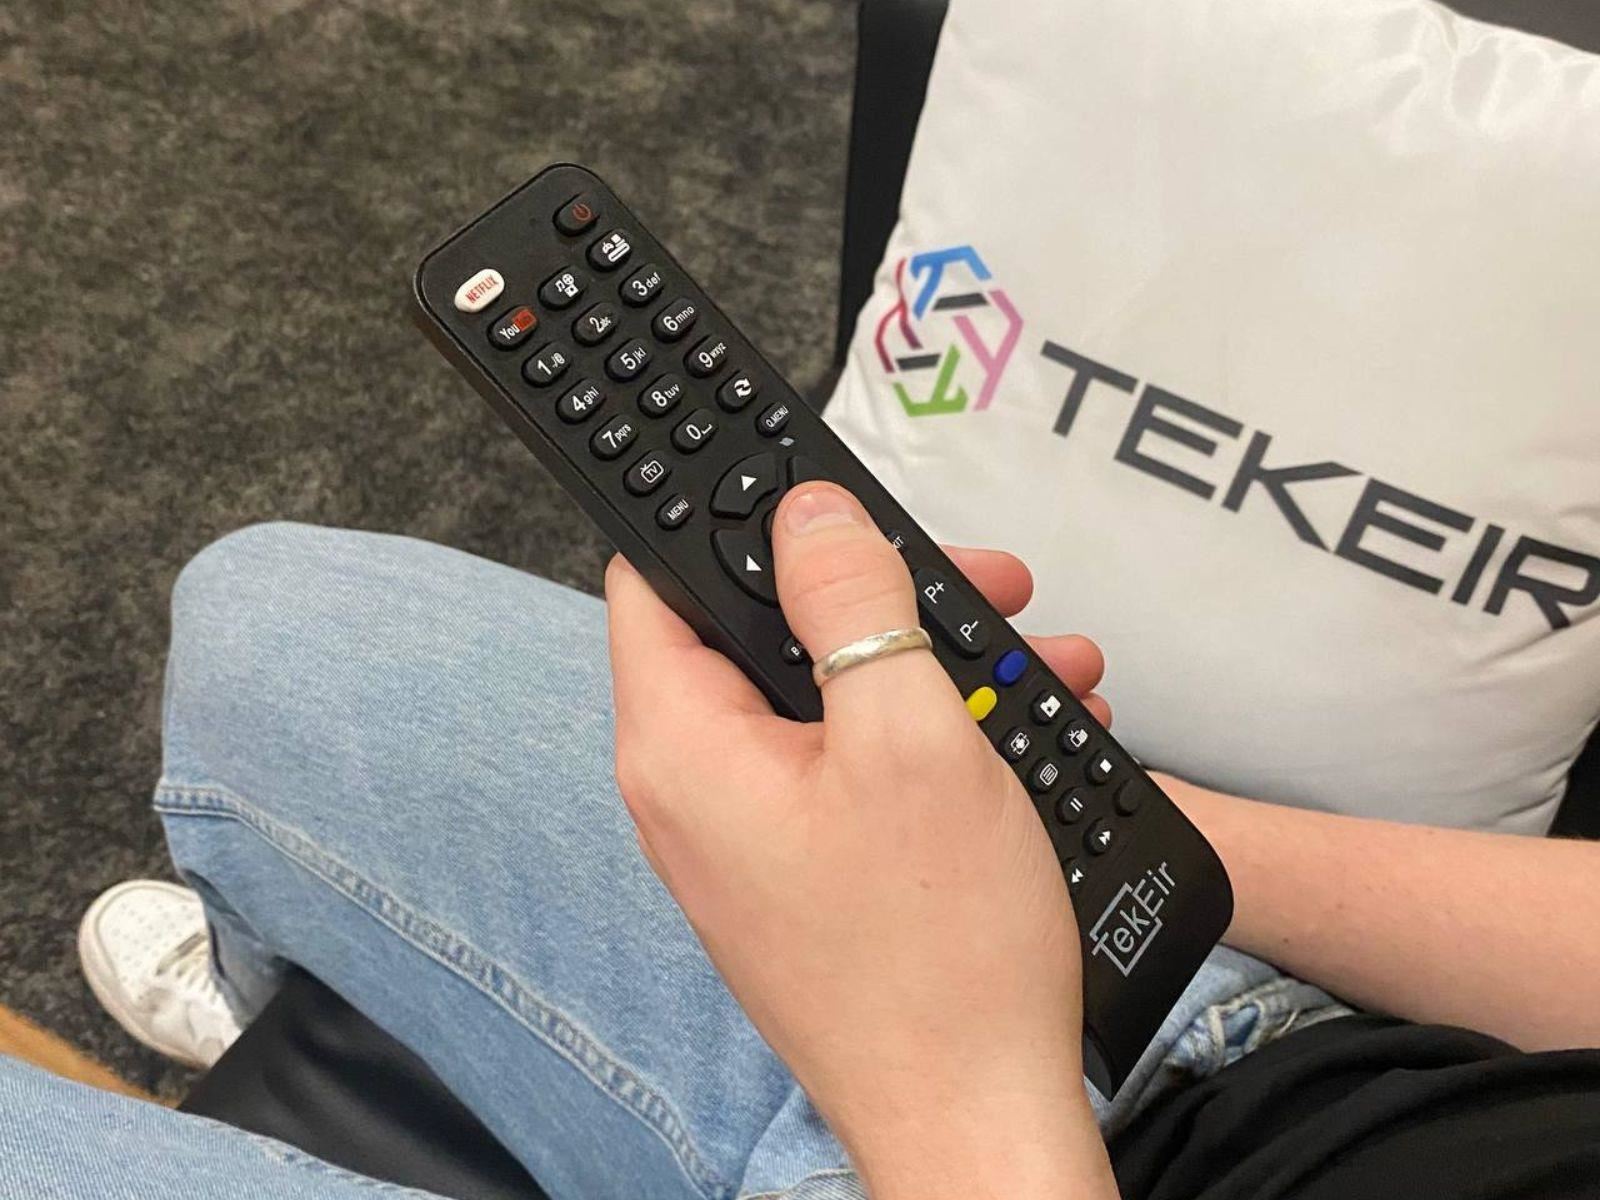 Image shows someone holding the replacement remote control